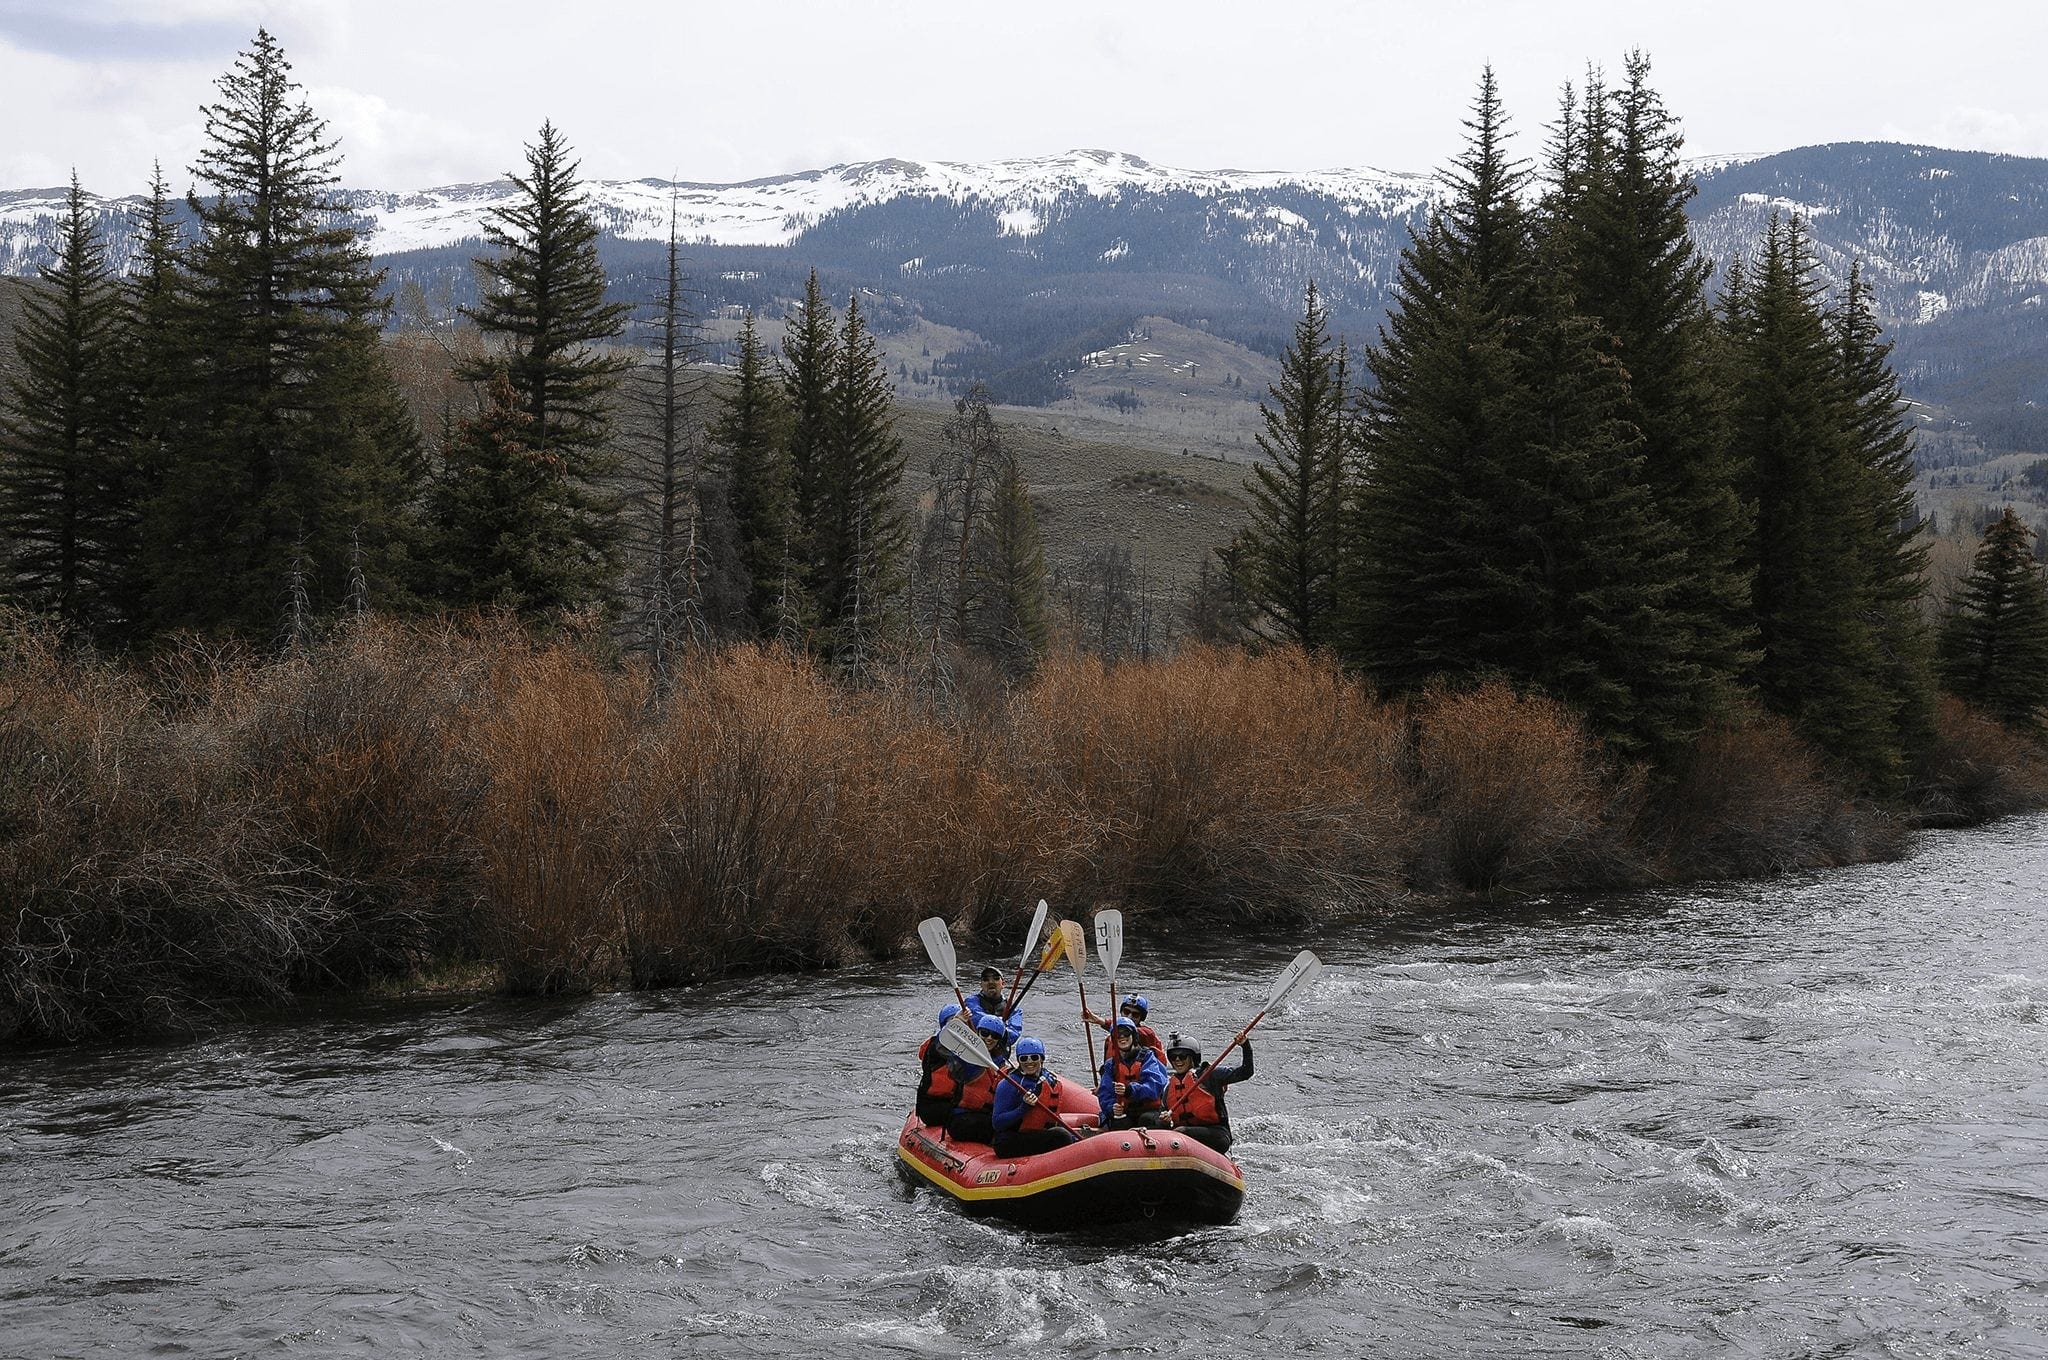 River rafters in Breckenridge with a scenic view